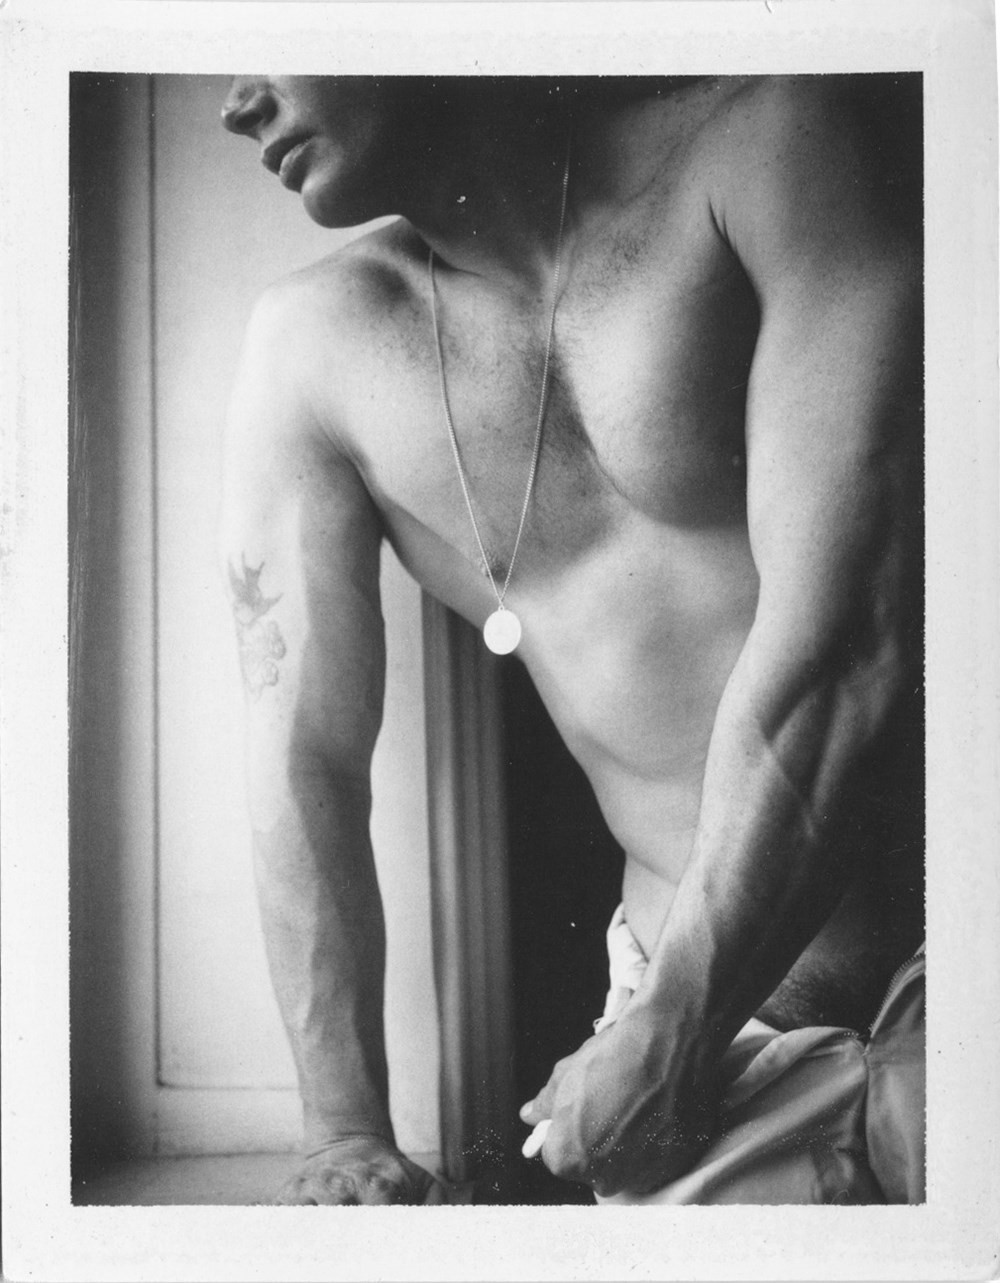 Vintage Polaroid Boys Porn - The Man Who Changed Male Erotica Forever | AnotherMan